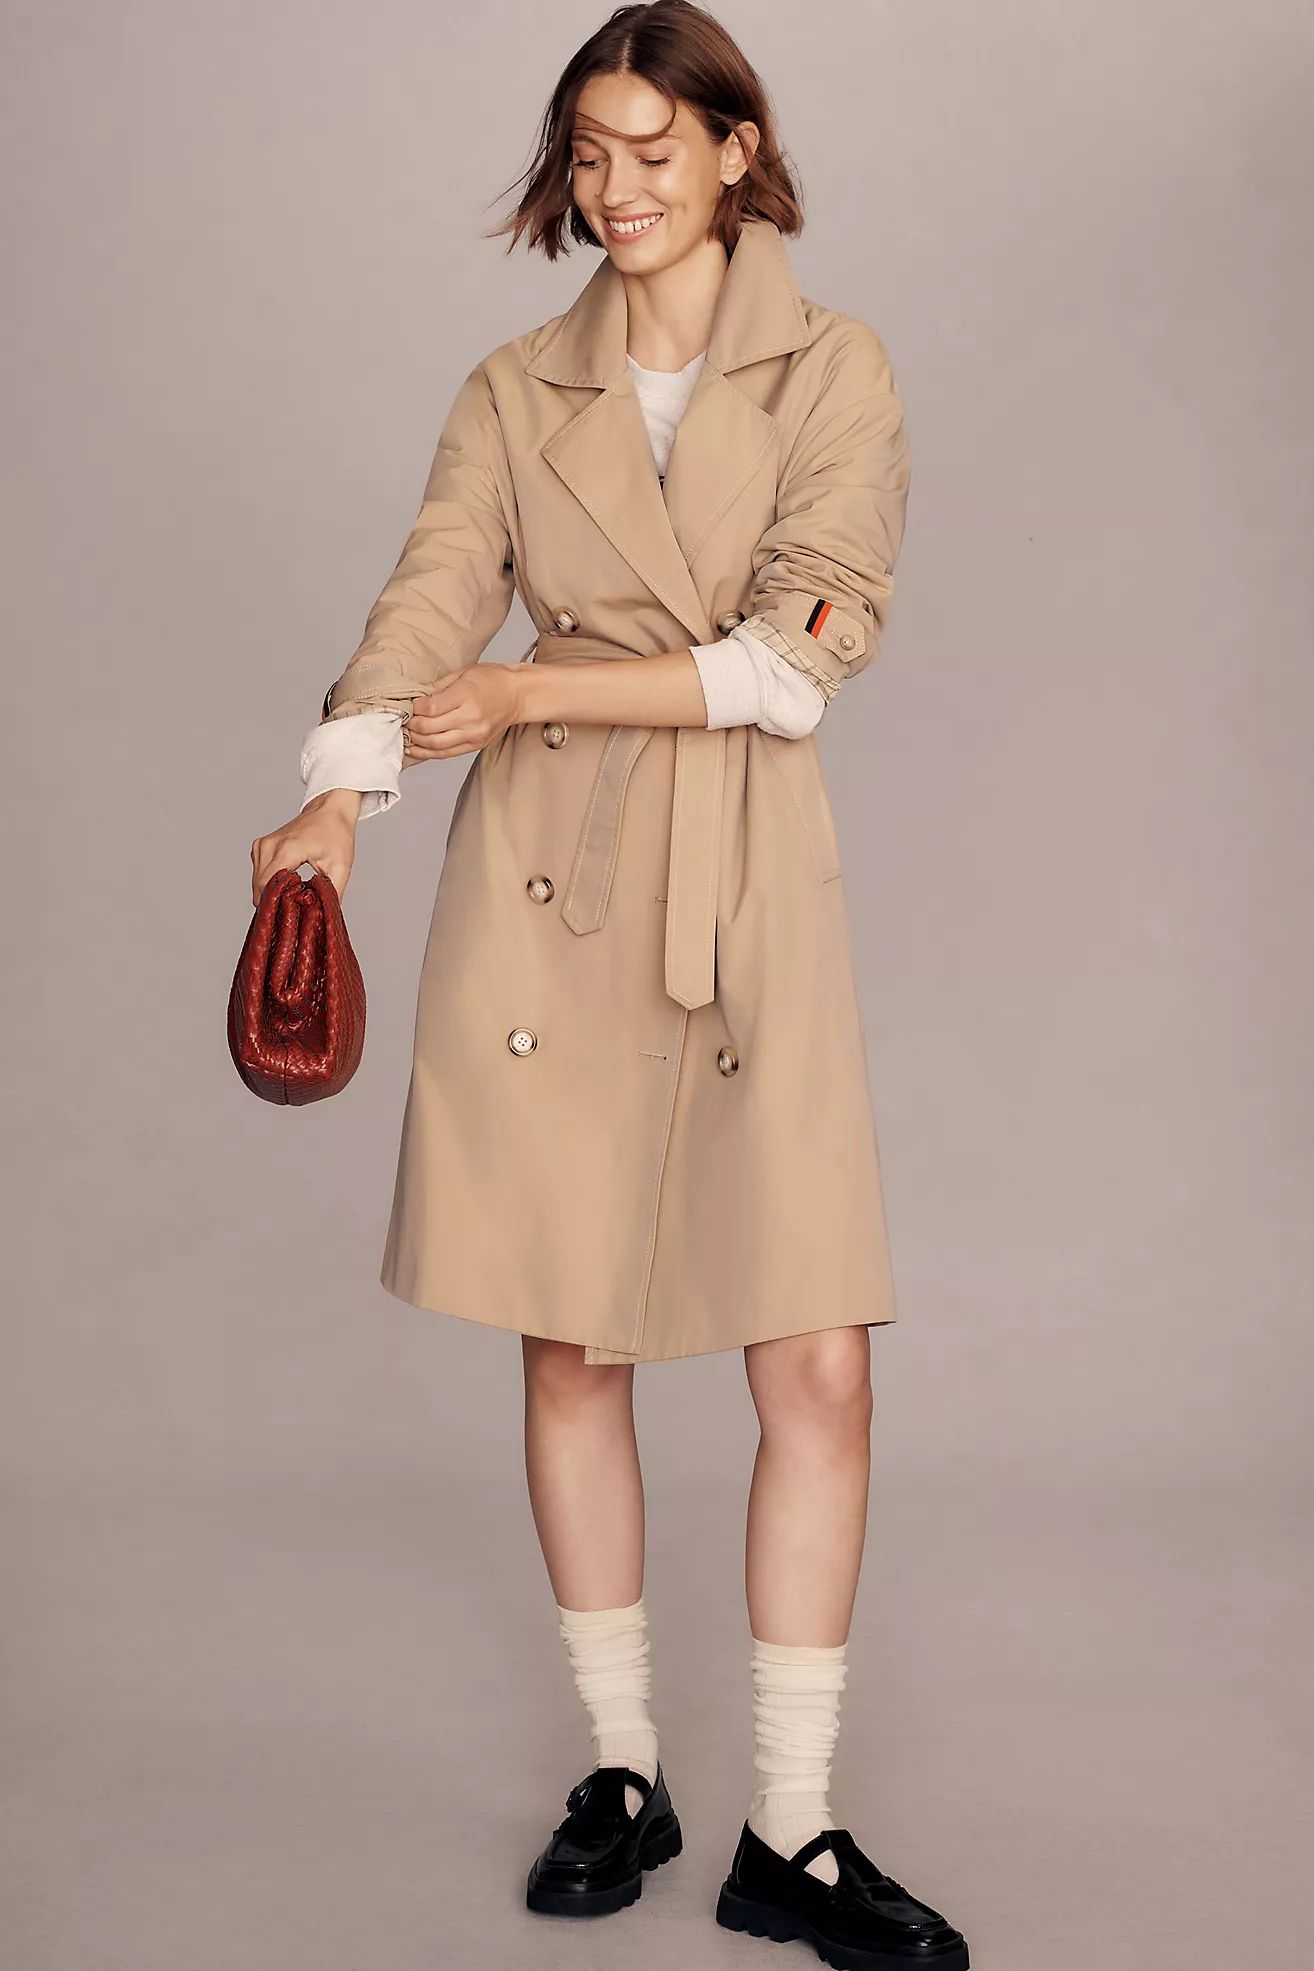 KULE Rox Double-Breasted Trench Coat | Anthropologie (US)